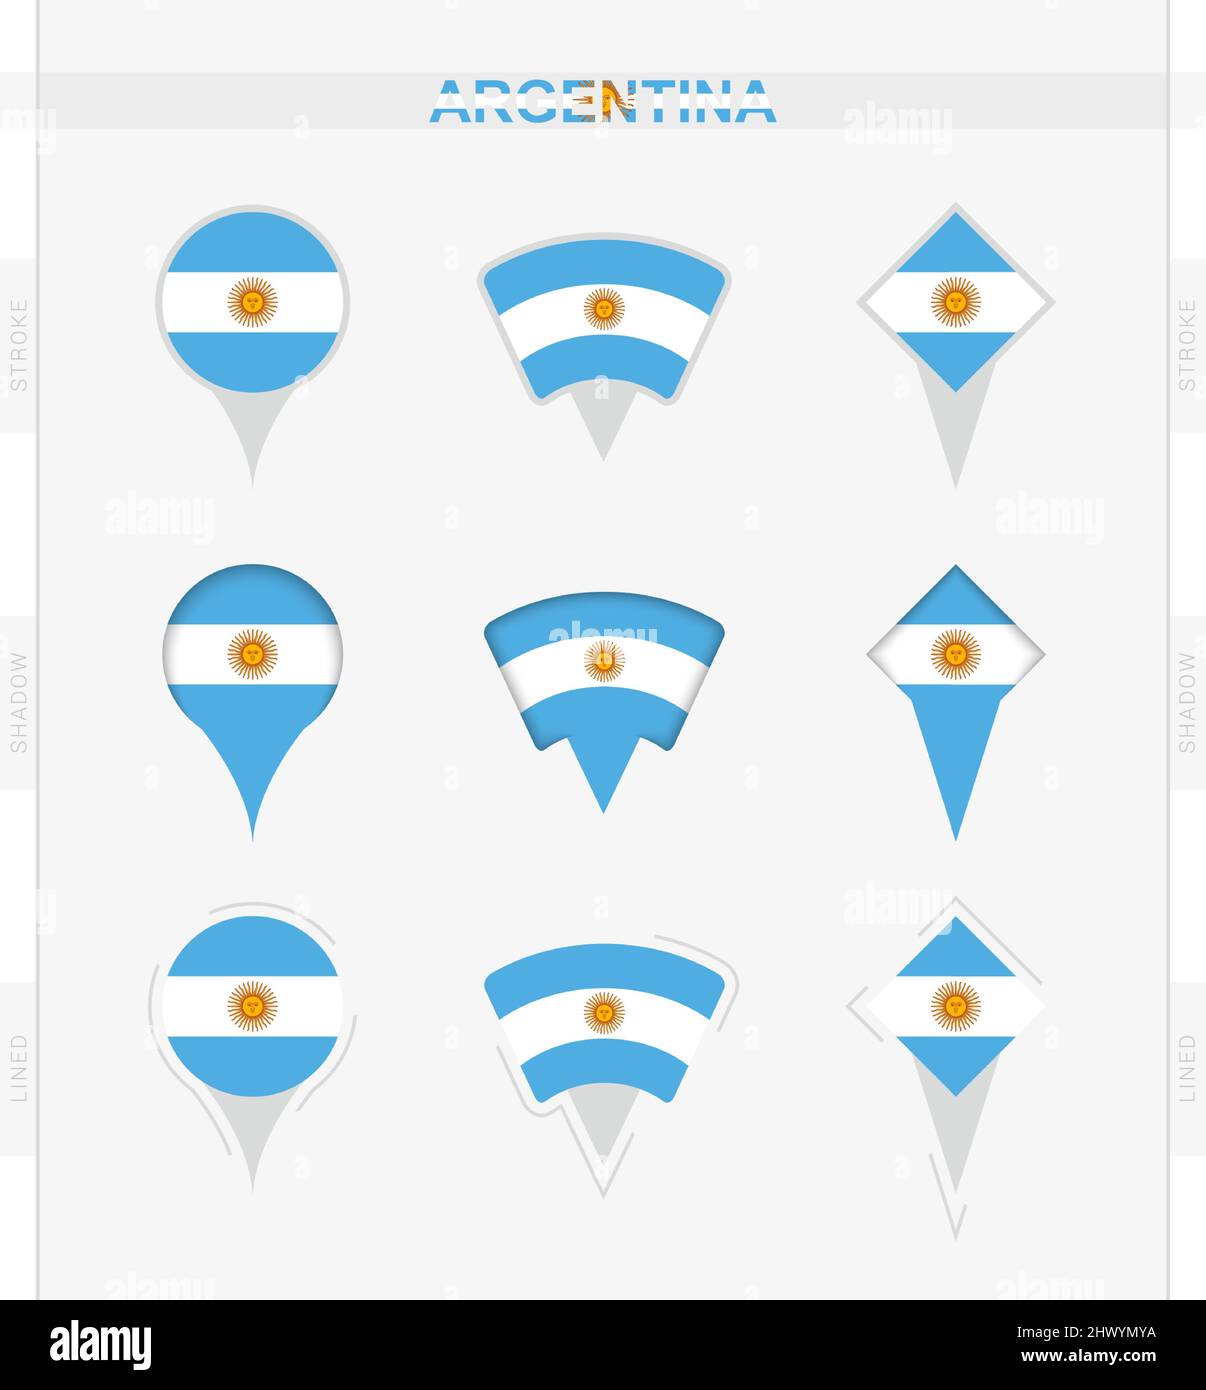 Argentina flag, set of location pin icons of Argentina flag. Vector illustration of national symbols. Stock Vector